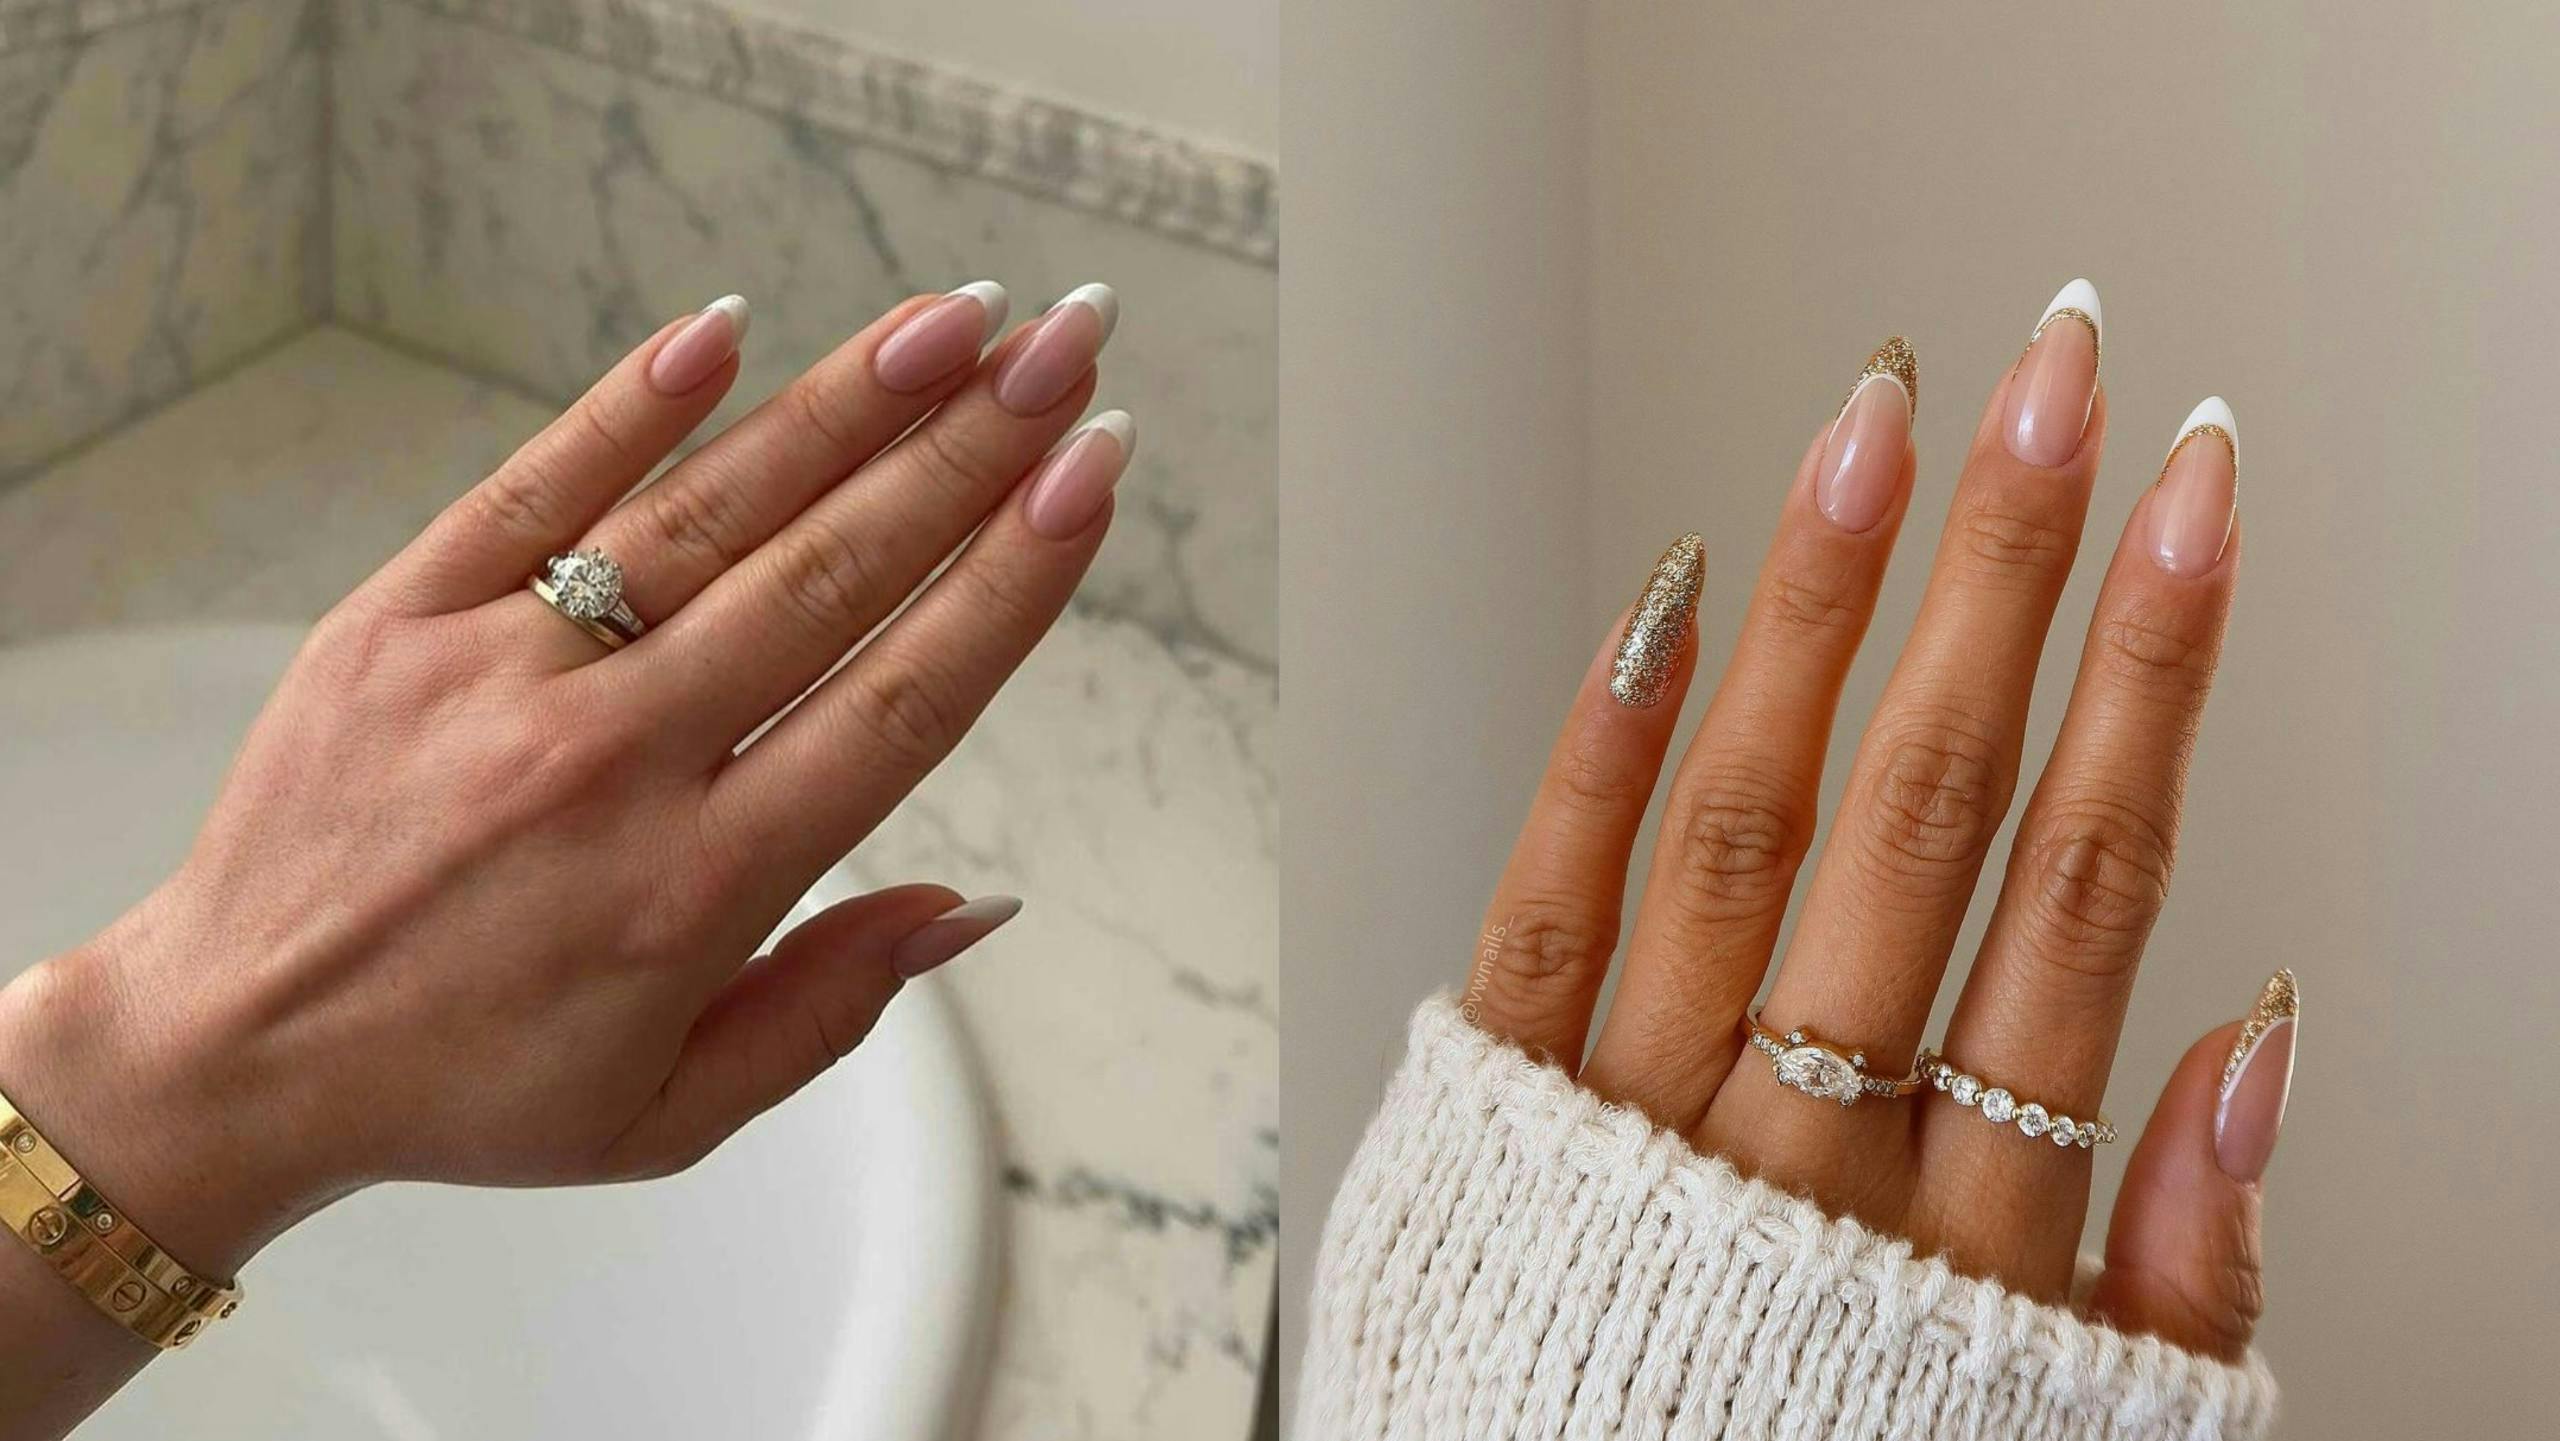 French manicure this season